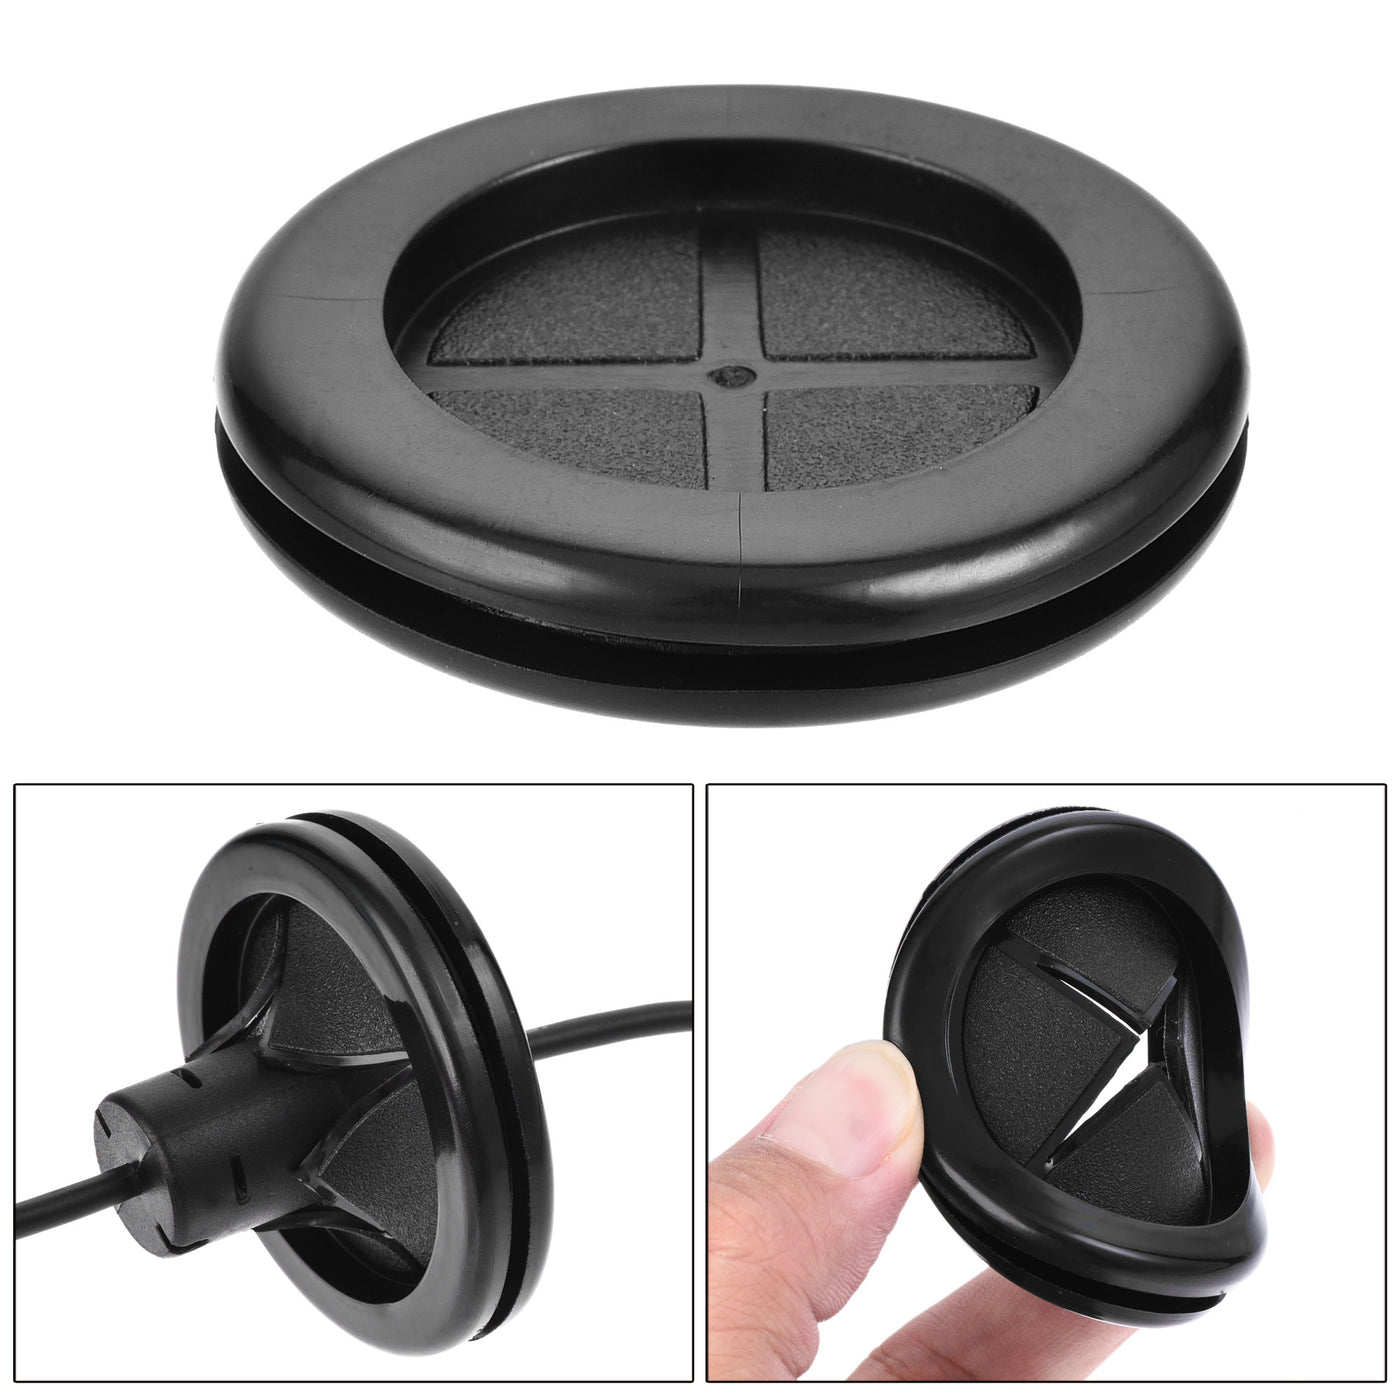 Uxcell Uxcell Rubber Grommet Round Double-Sided Mount Dia 25 mm for Wire Protection 8pcs